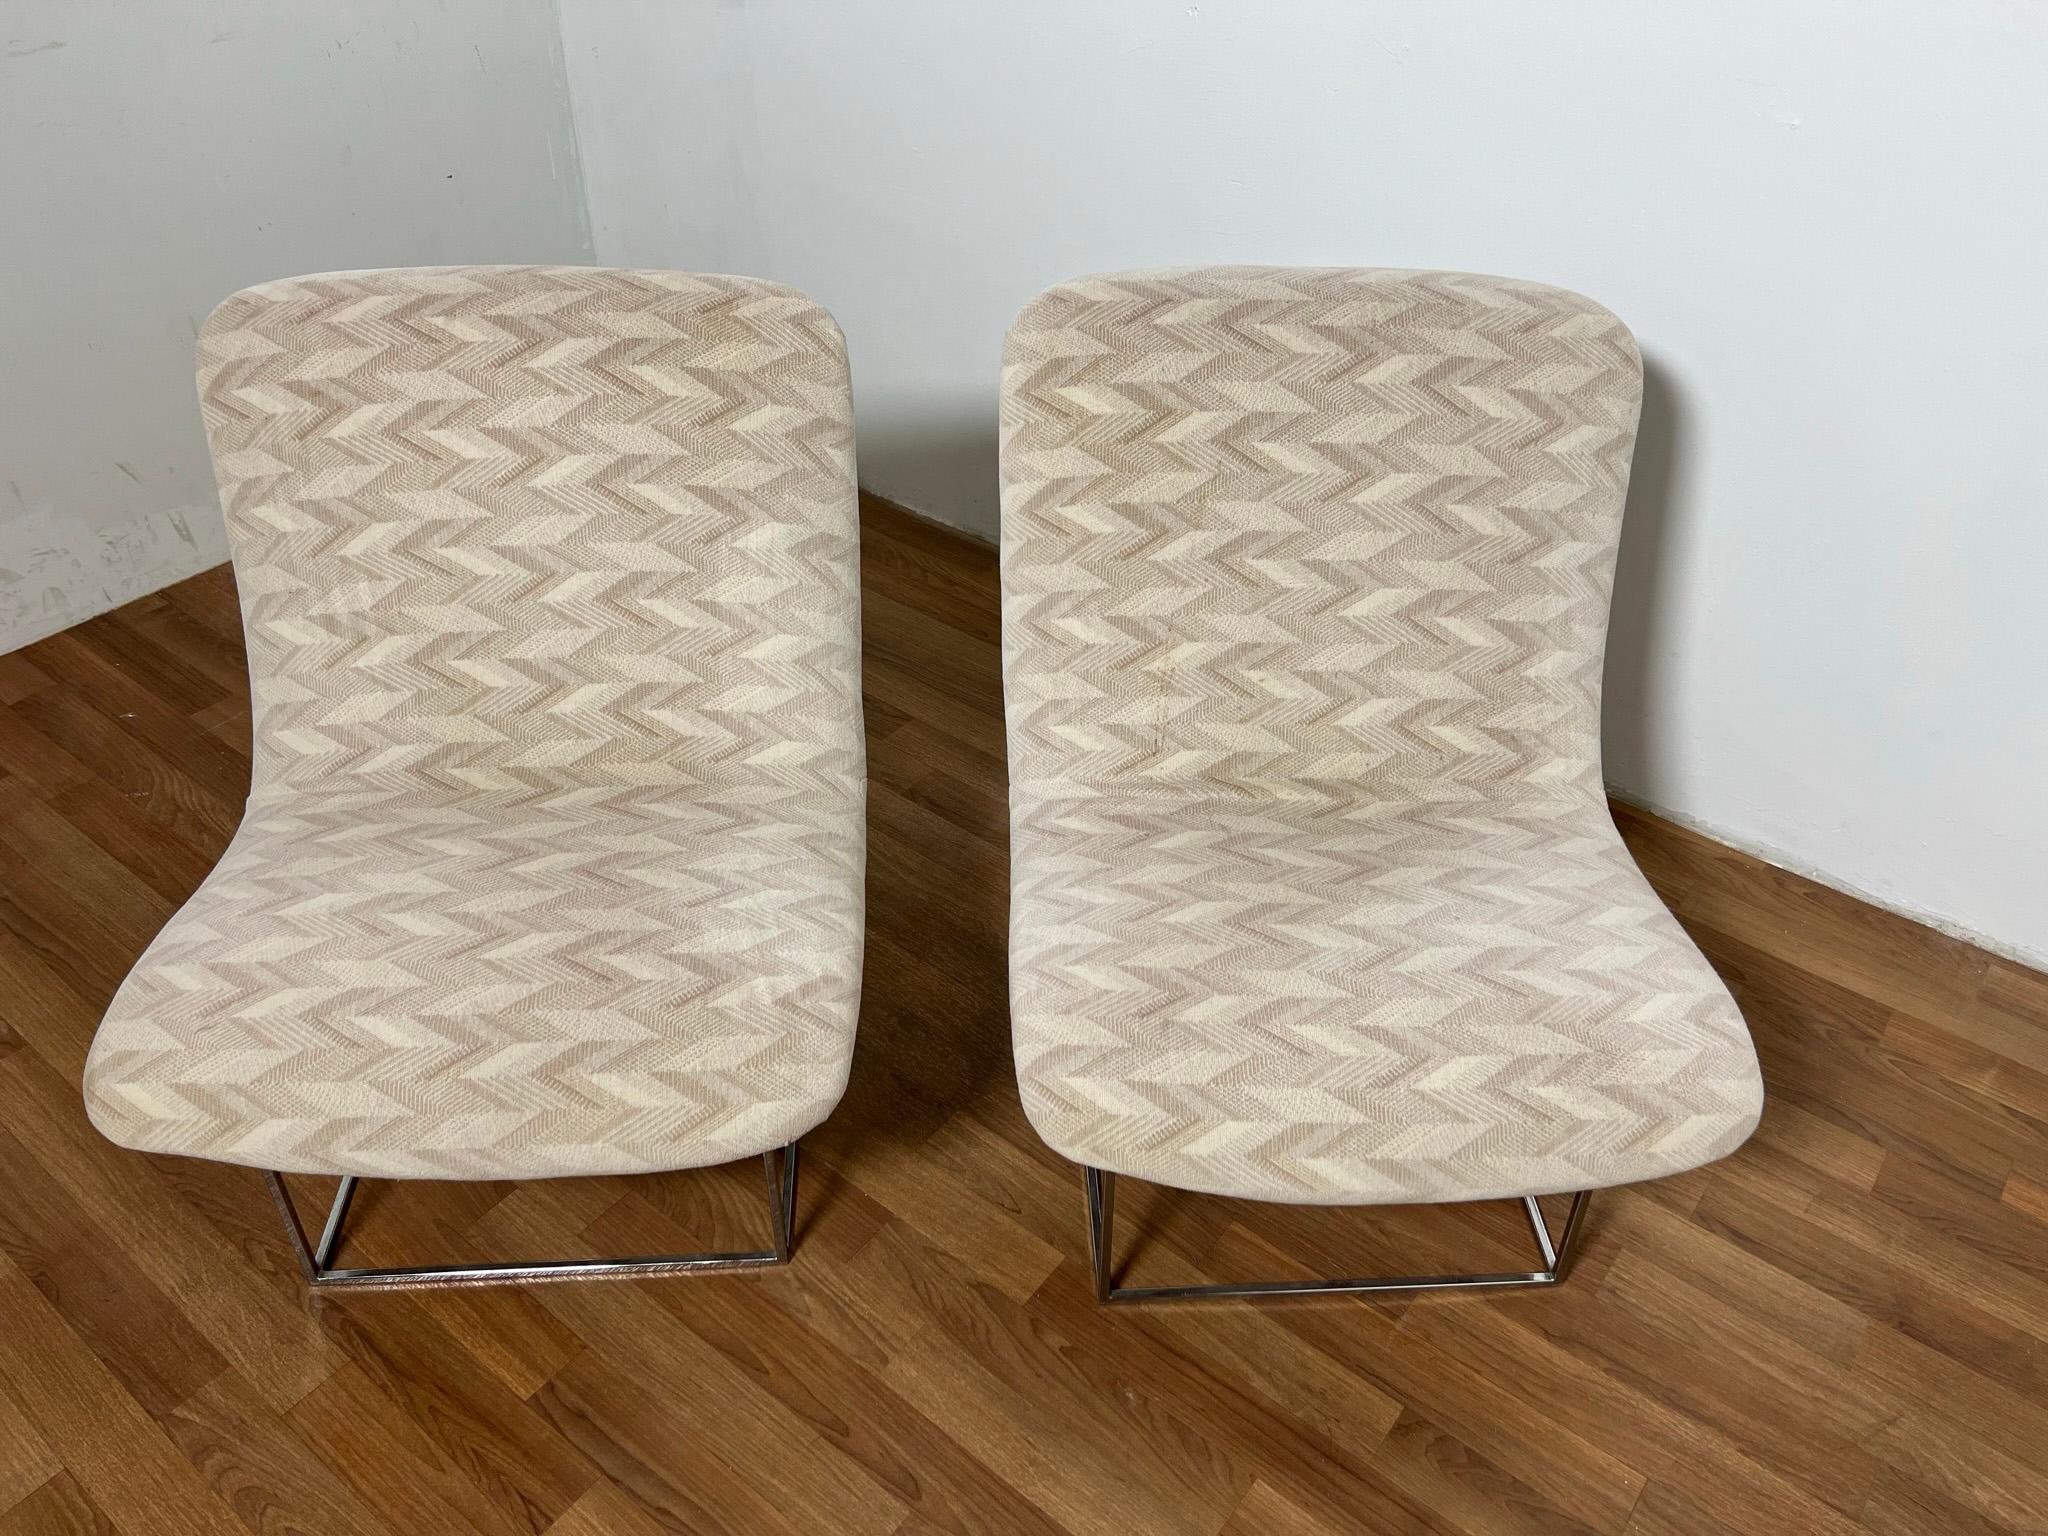 Pair of Milo Baughman Scoop Form Slipper Lounge Chairs Circa 1970s For Sale 1